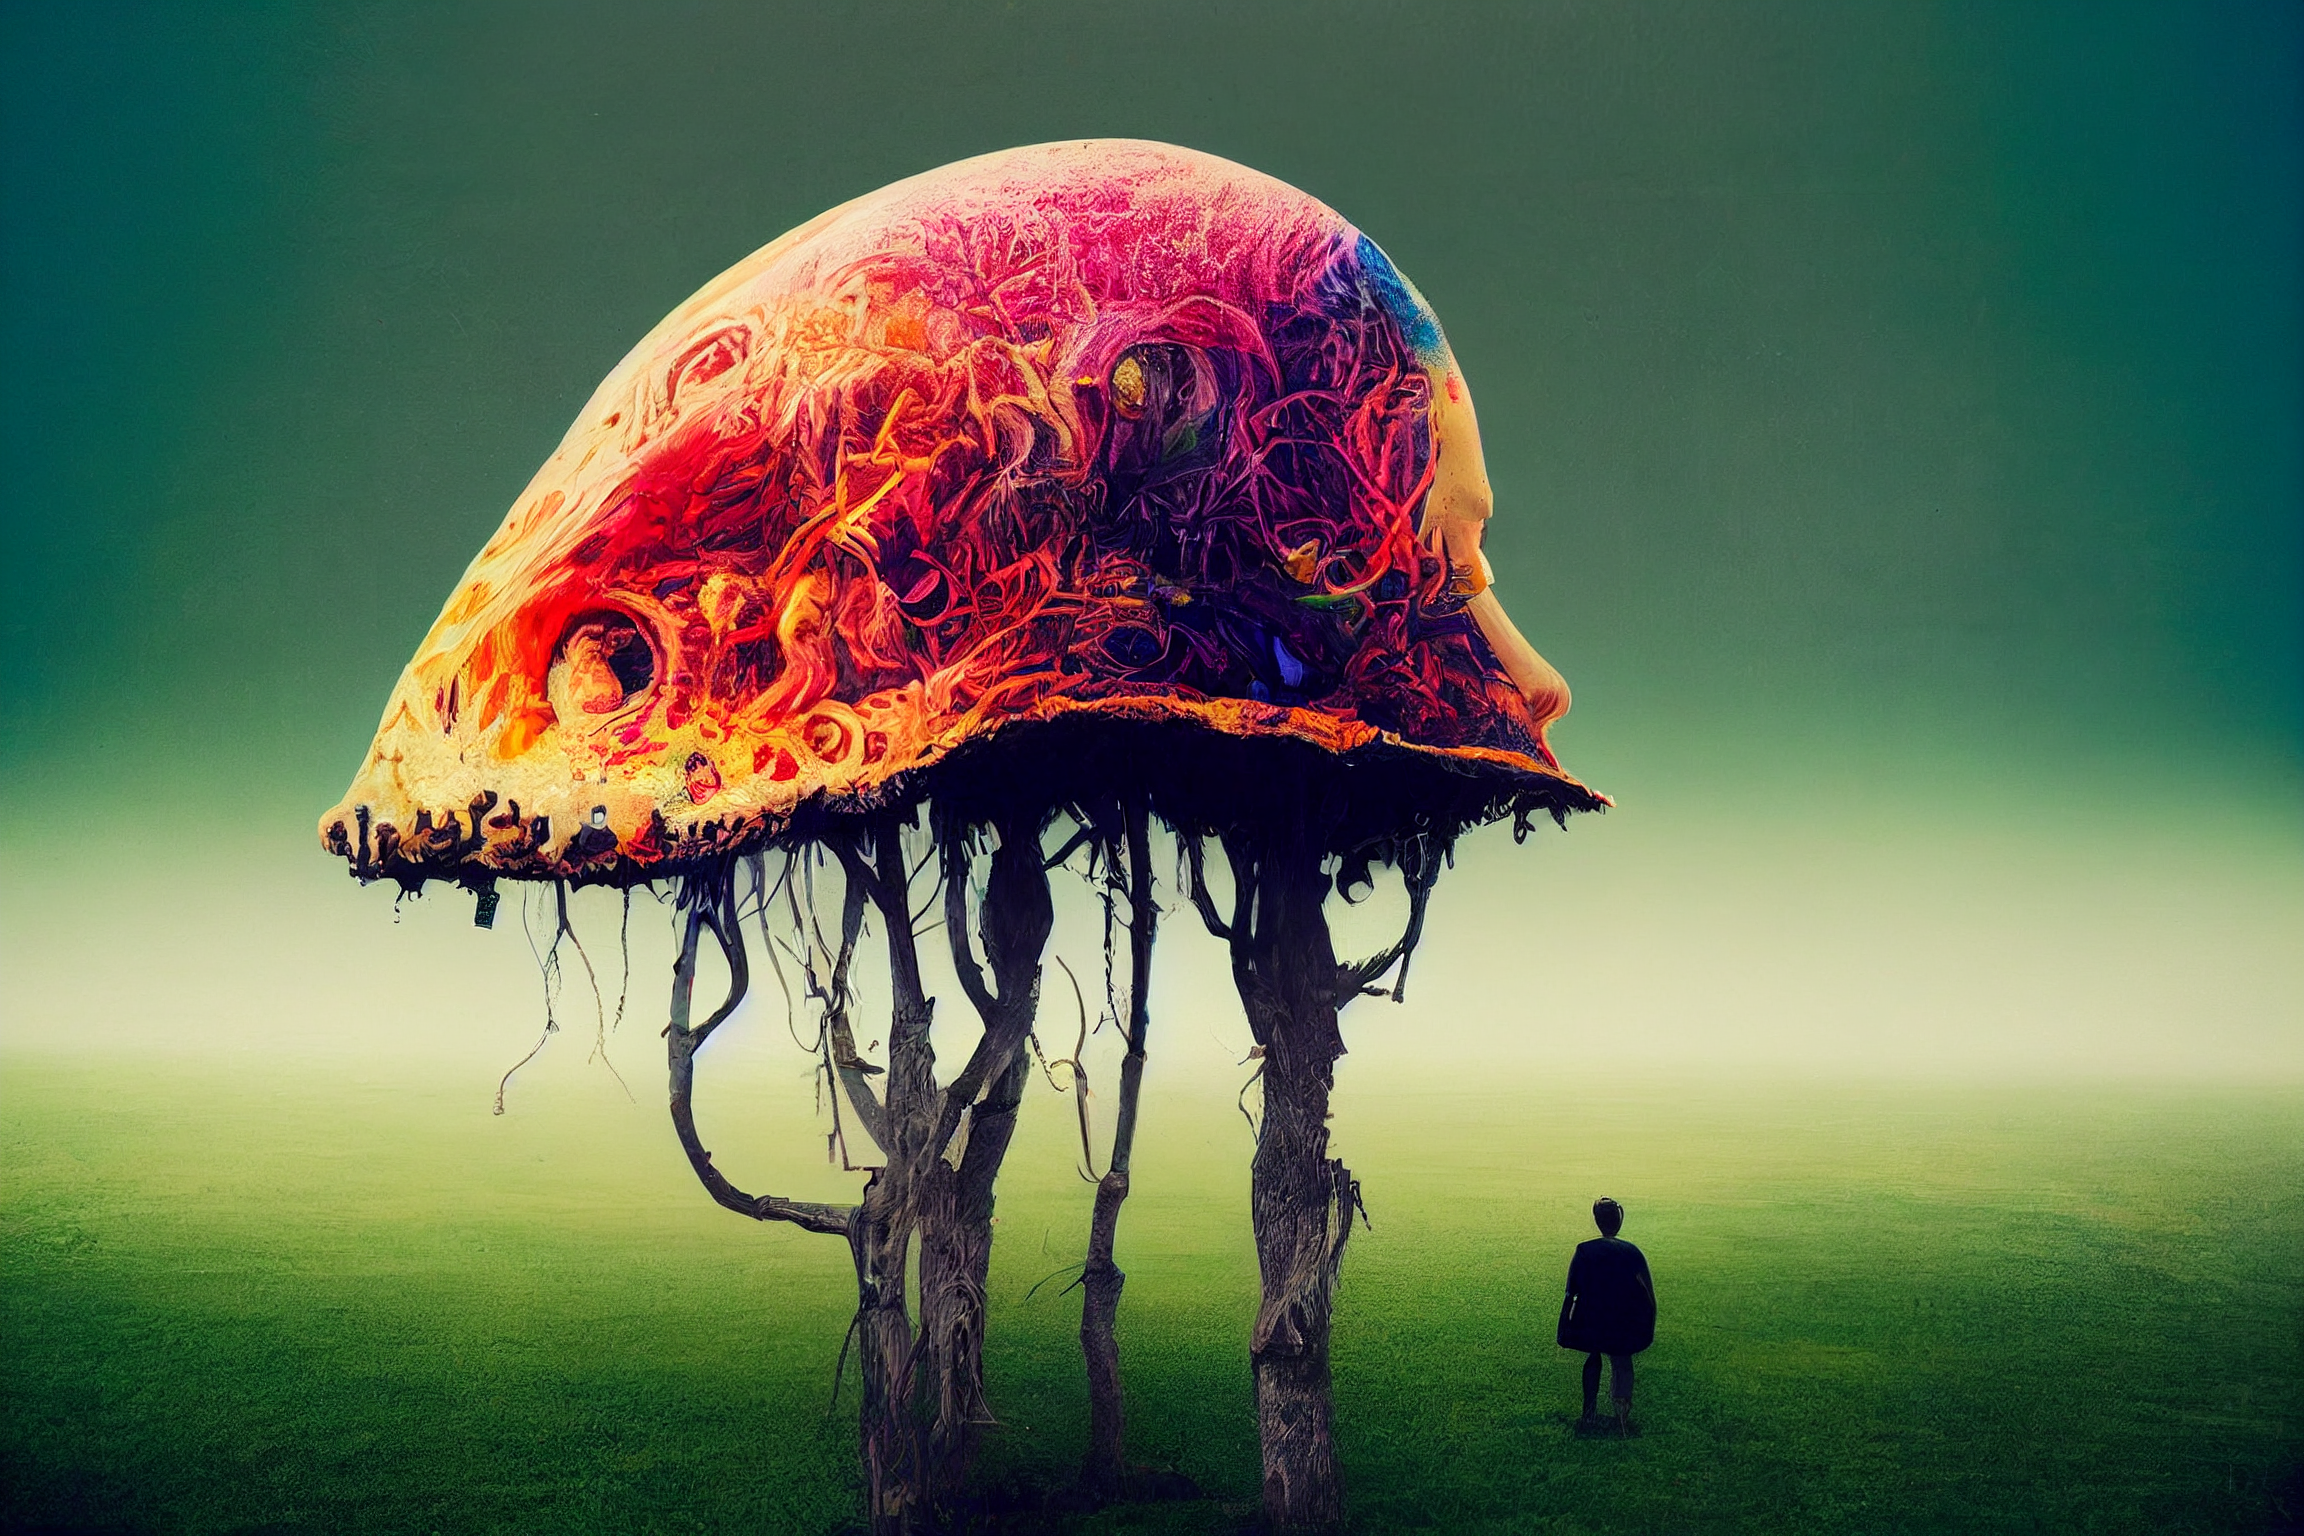 I’ll keep my head up high through the downs and lows – Surreal mushroom